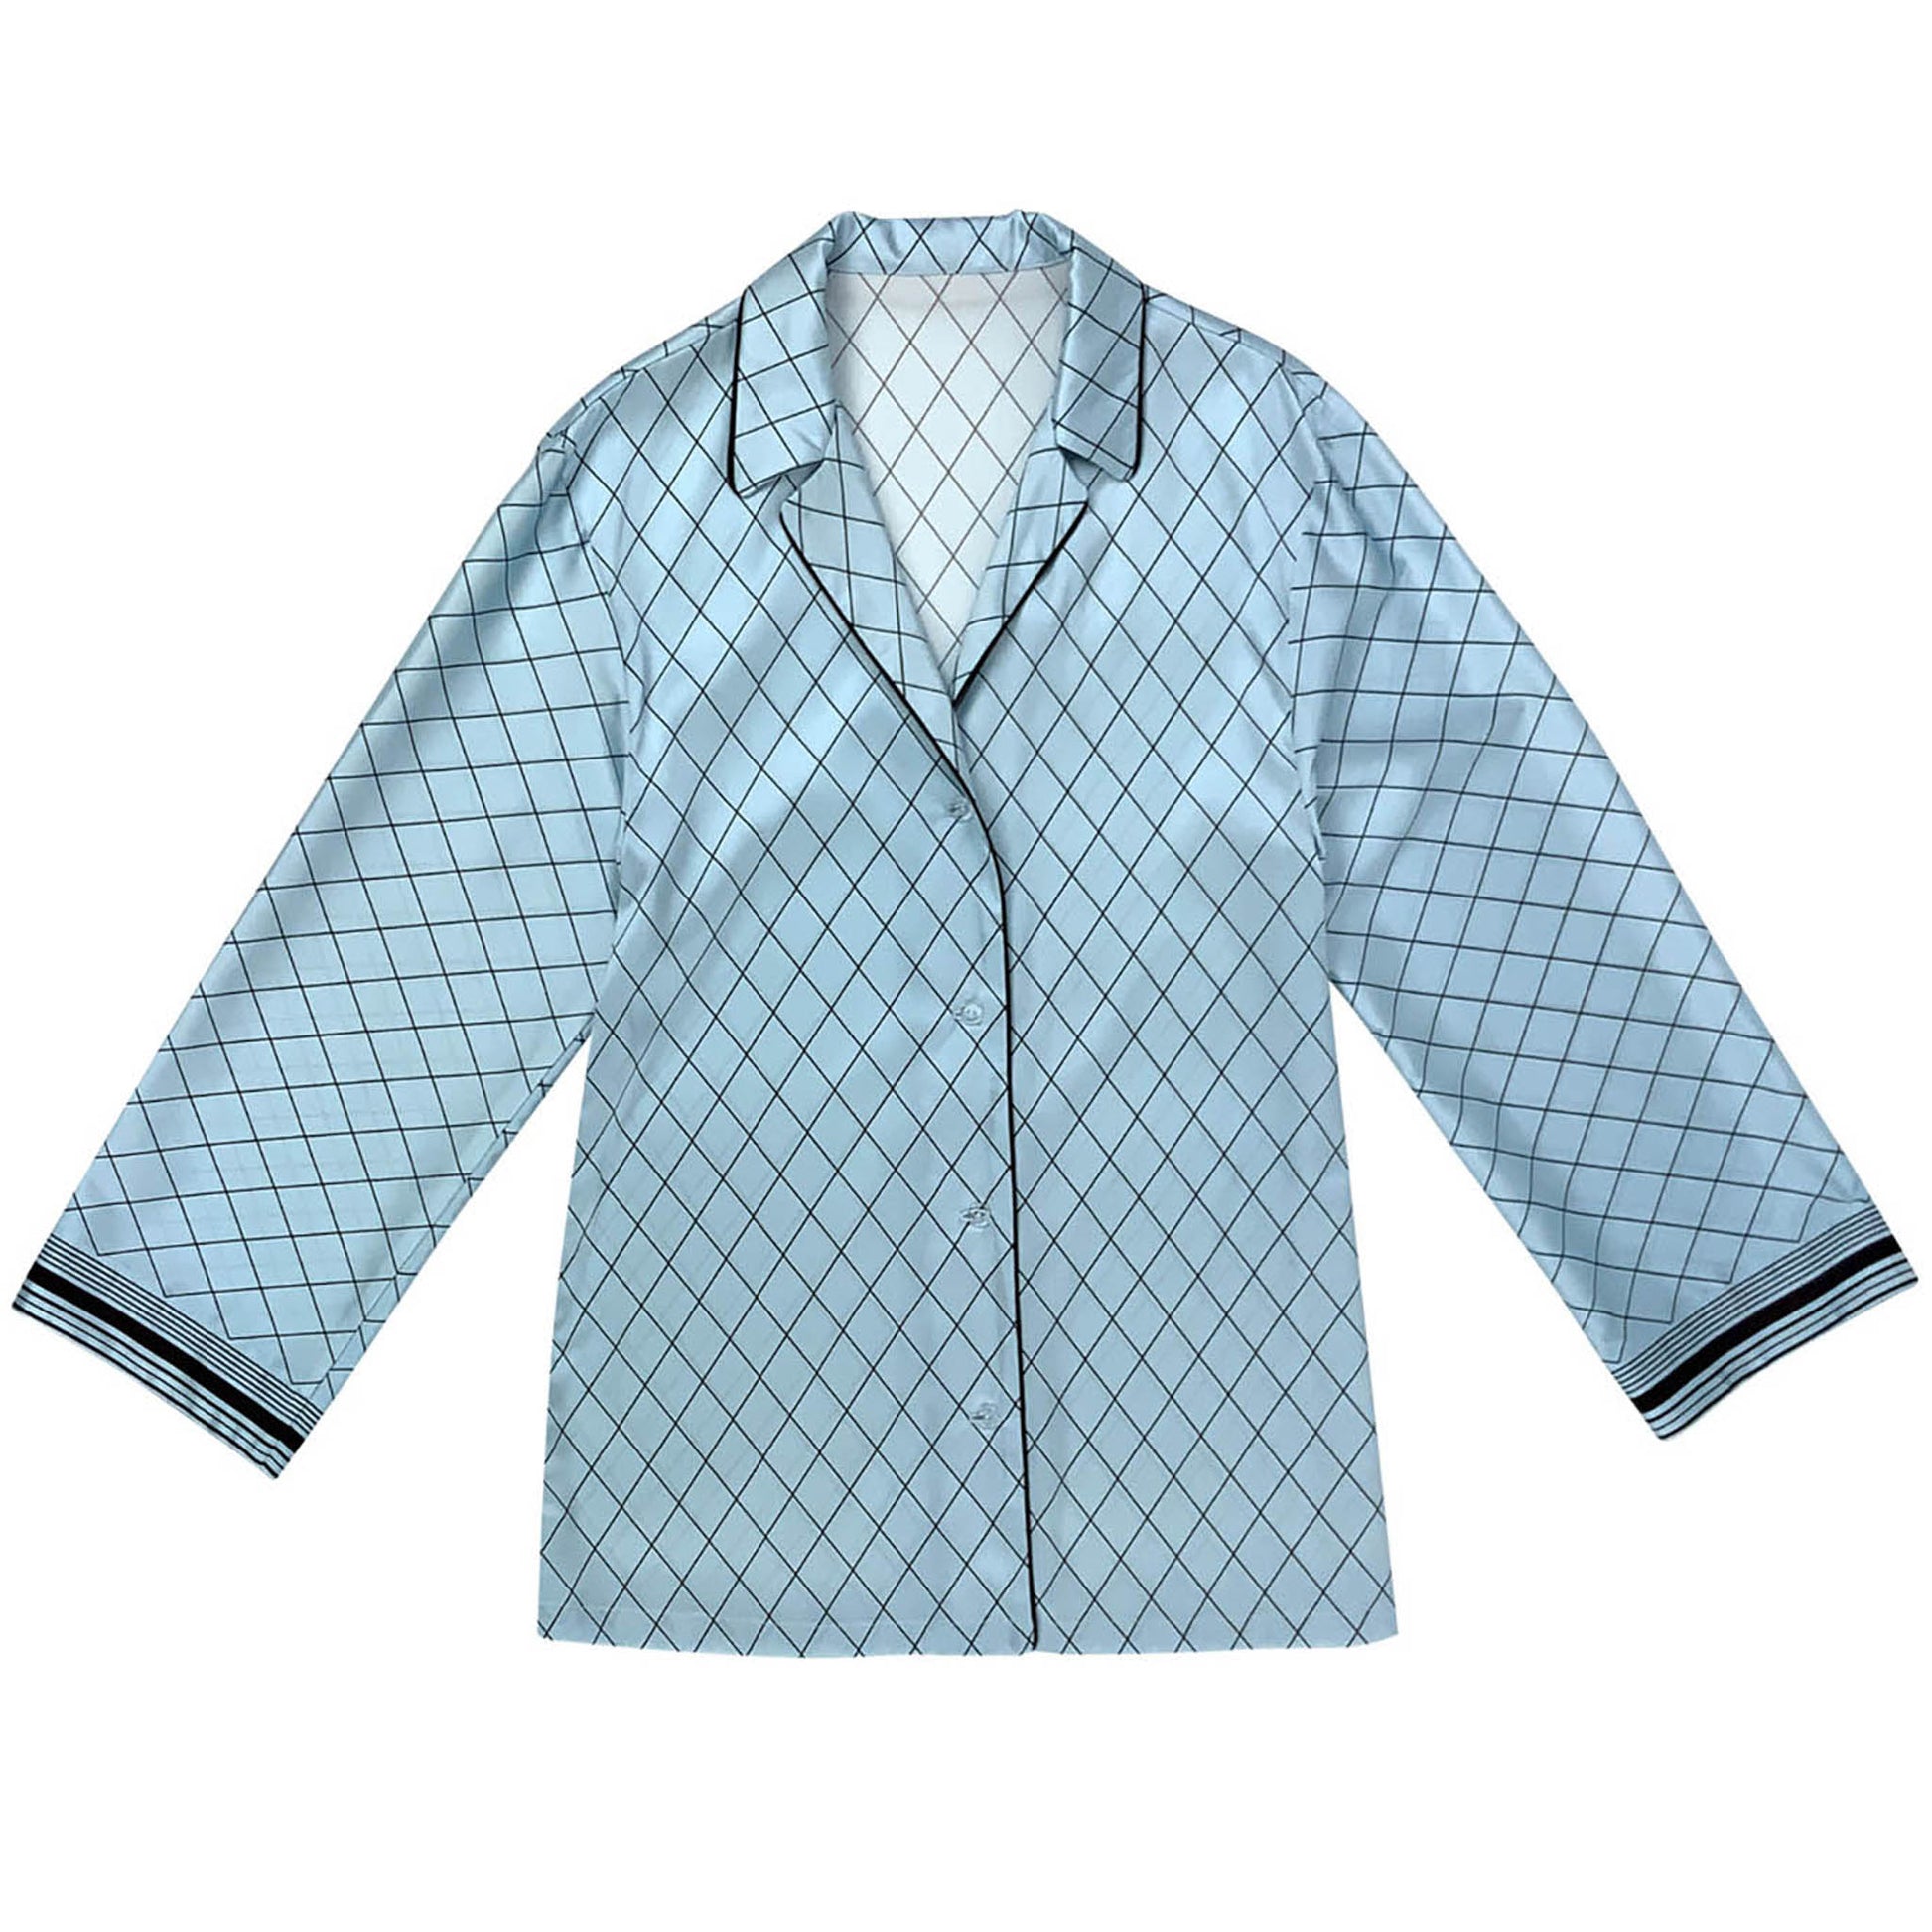 The Lady shirt from NOKAYA is crafted from Mulberry silk and features a relaxed straight cut.